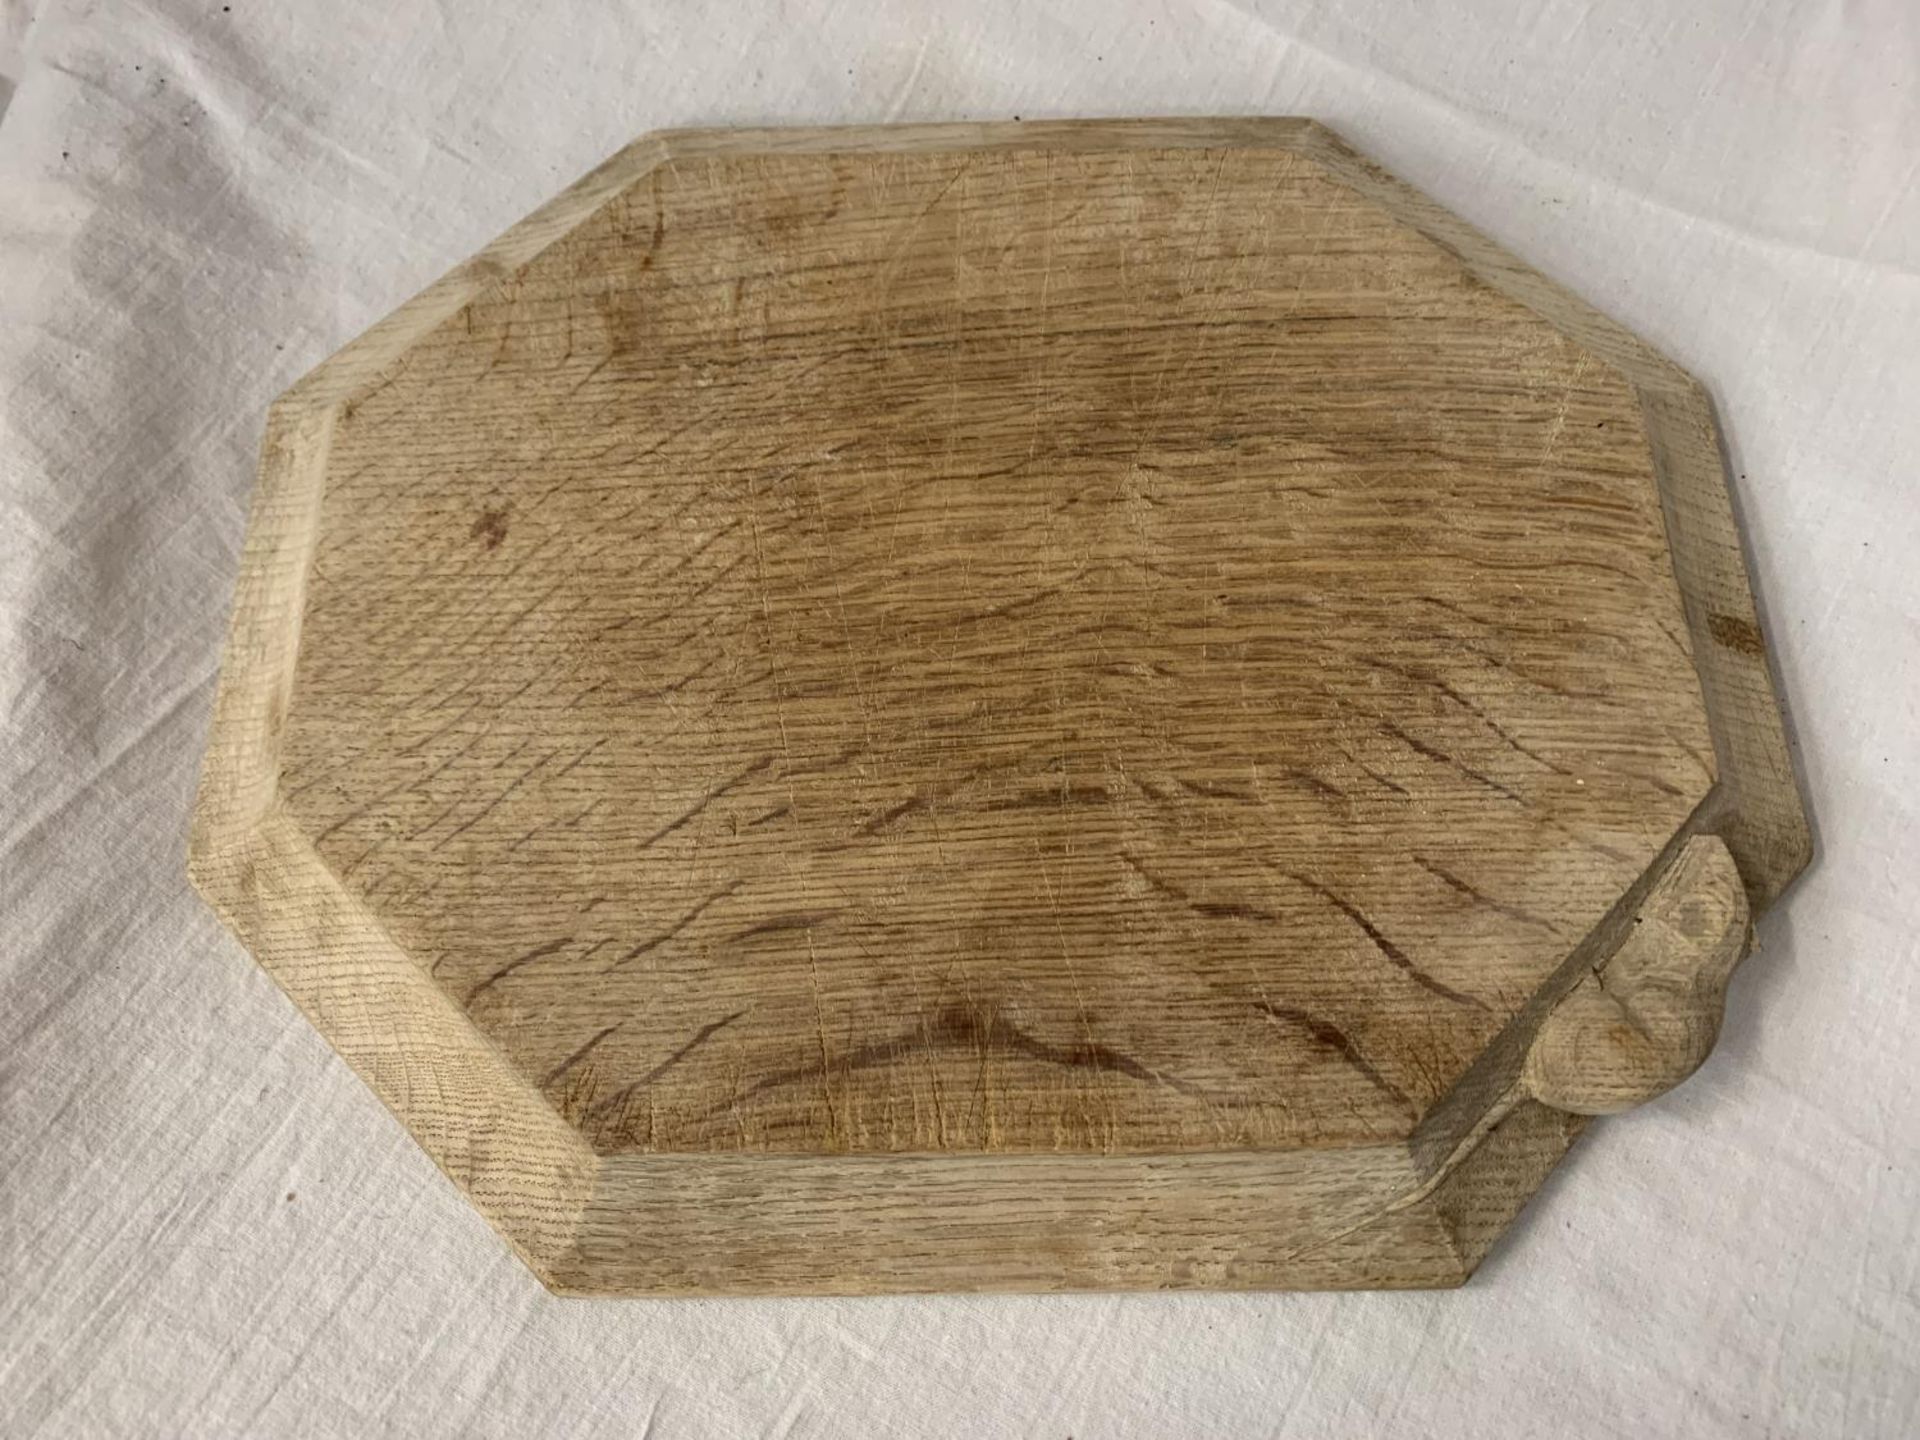 A ROBERT THOMPSON "MOUSEMAN" CARVED OAK CHOPPING/SERVING BOARD WITH MOUSE INSIGNIA 30.5CM X 25CM